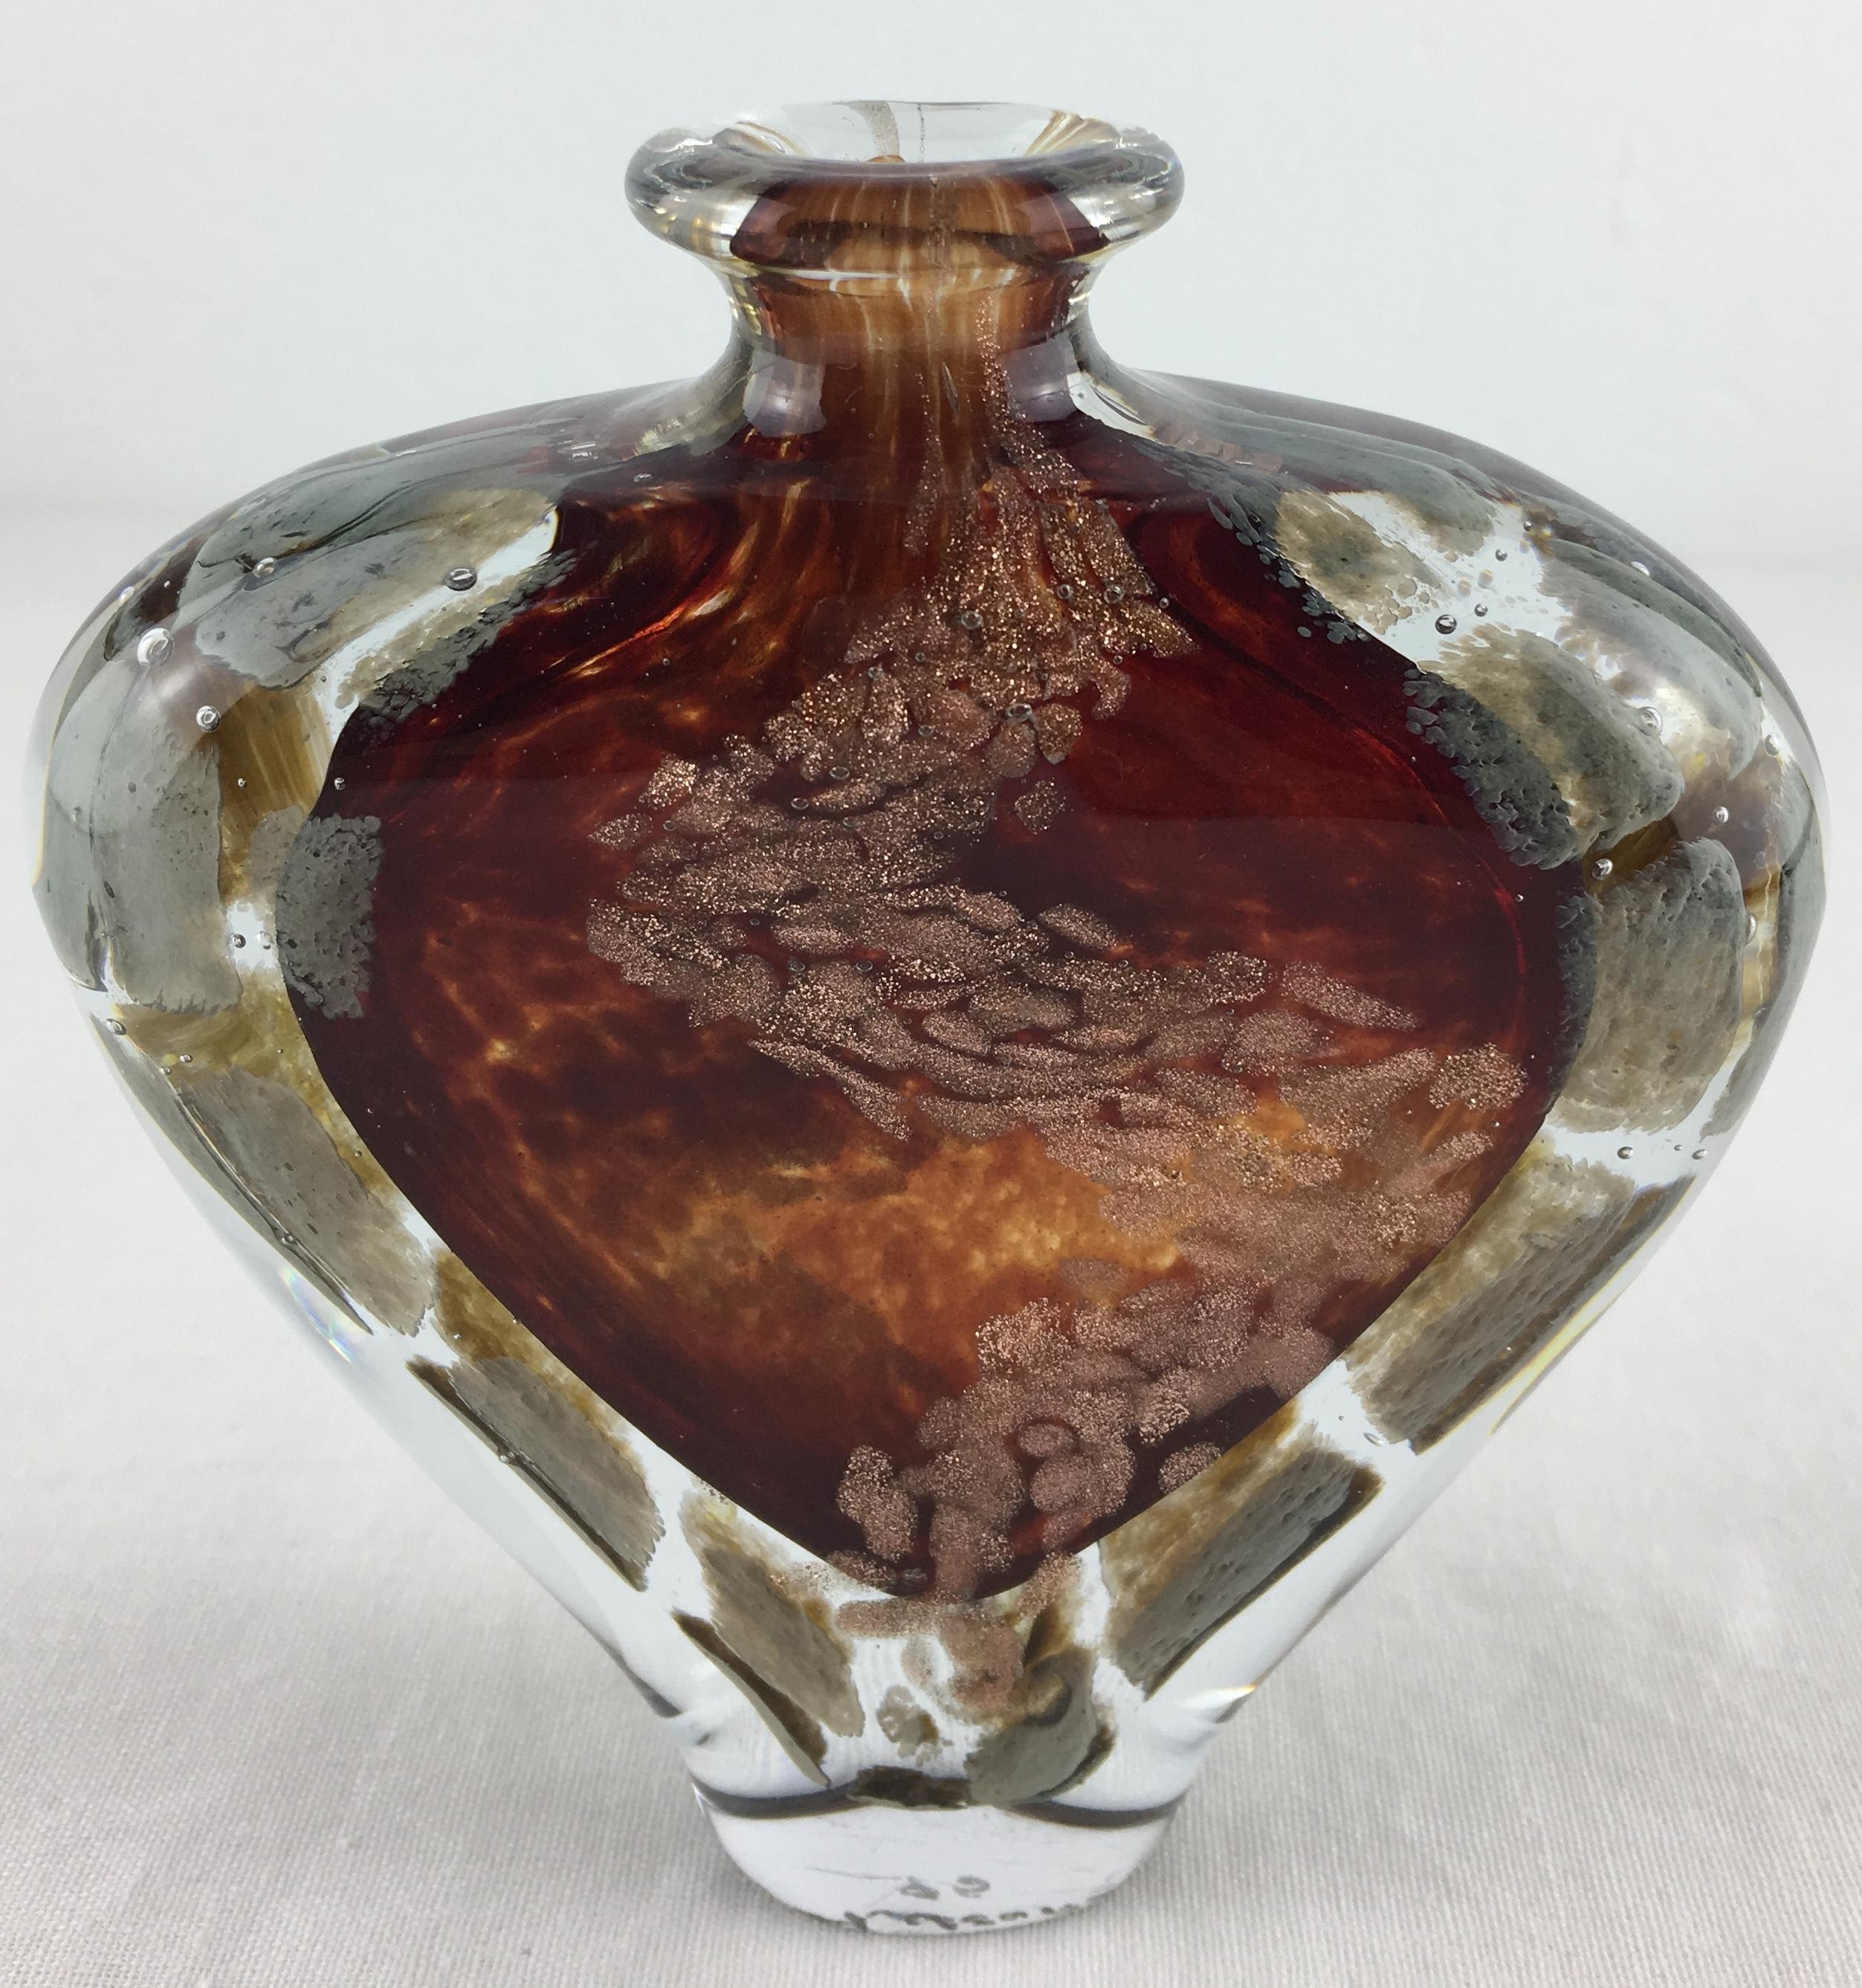 A unique and rare handcrafted heart shaped vase by Michele Luzoro, known as the Diva of Biot having radiated on the international glass landscape for more than thirty years. 

This heart shaped stem glass vase is blown with gold inclusion pallets is